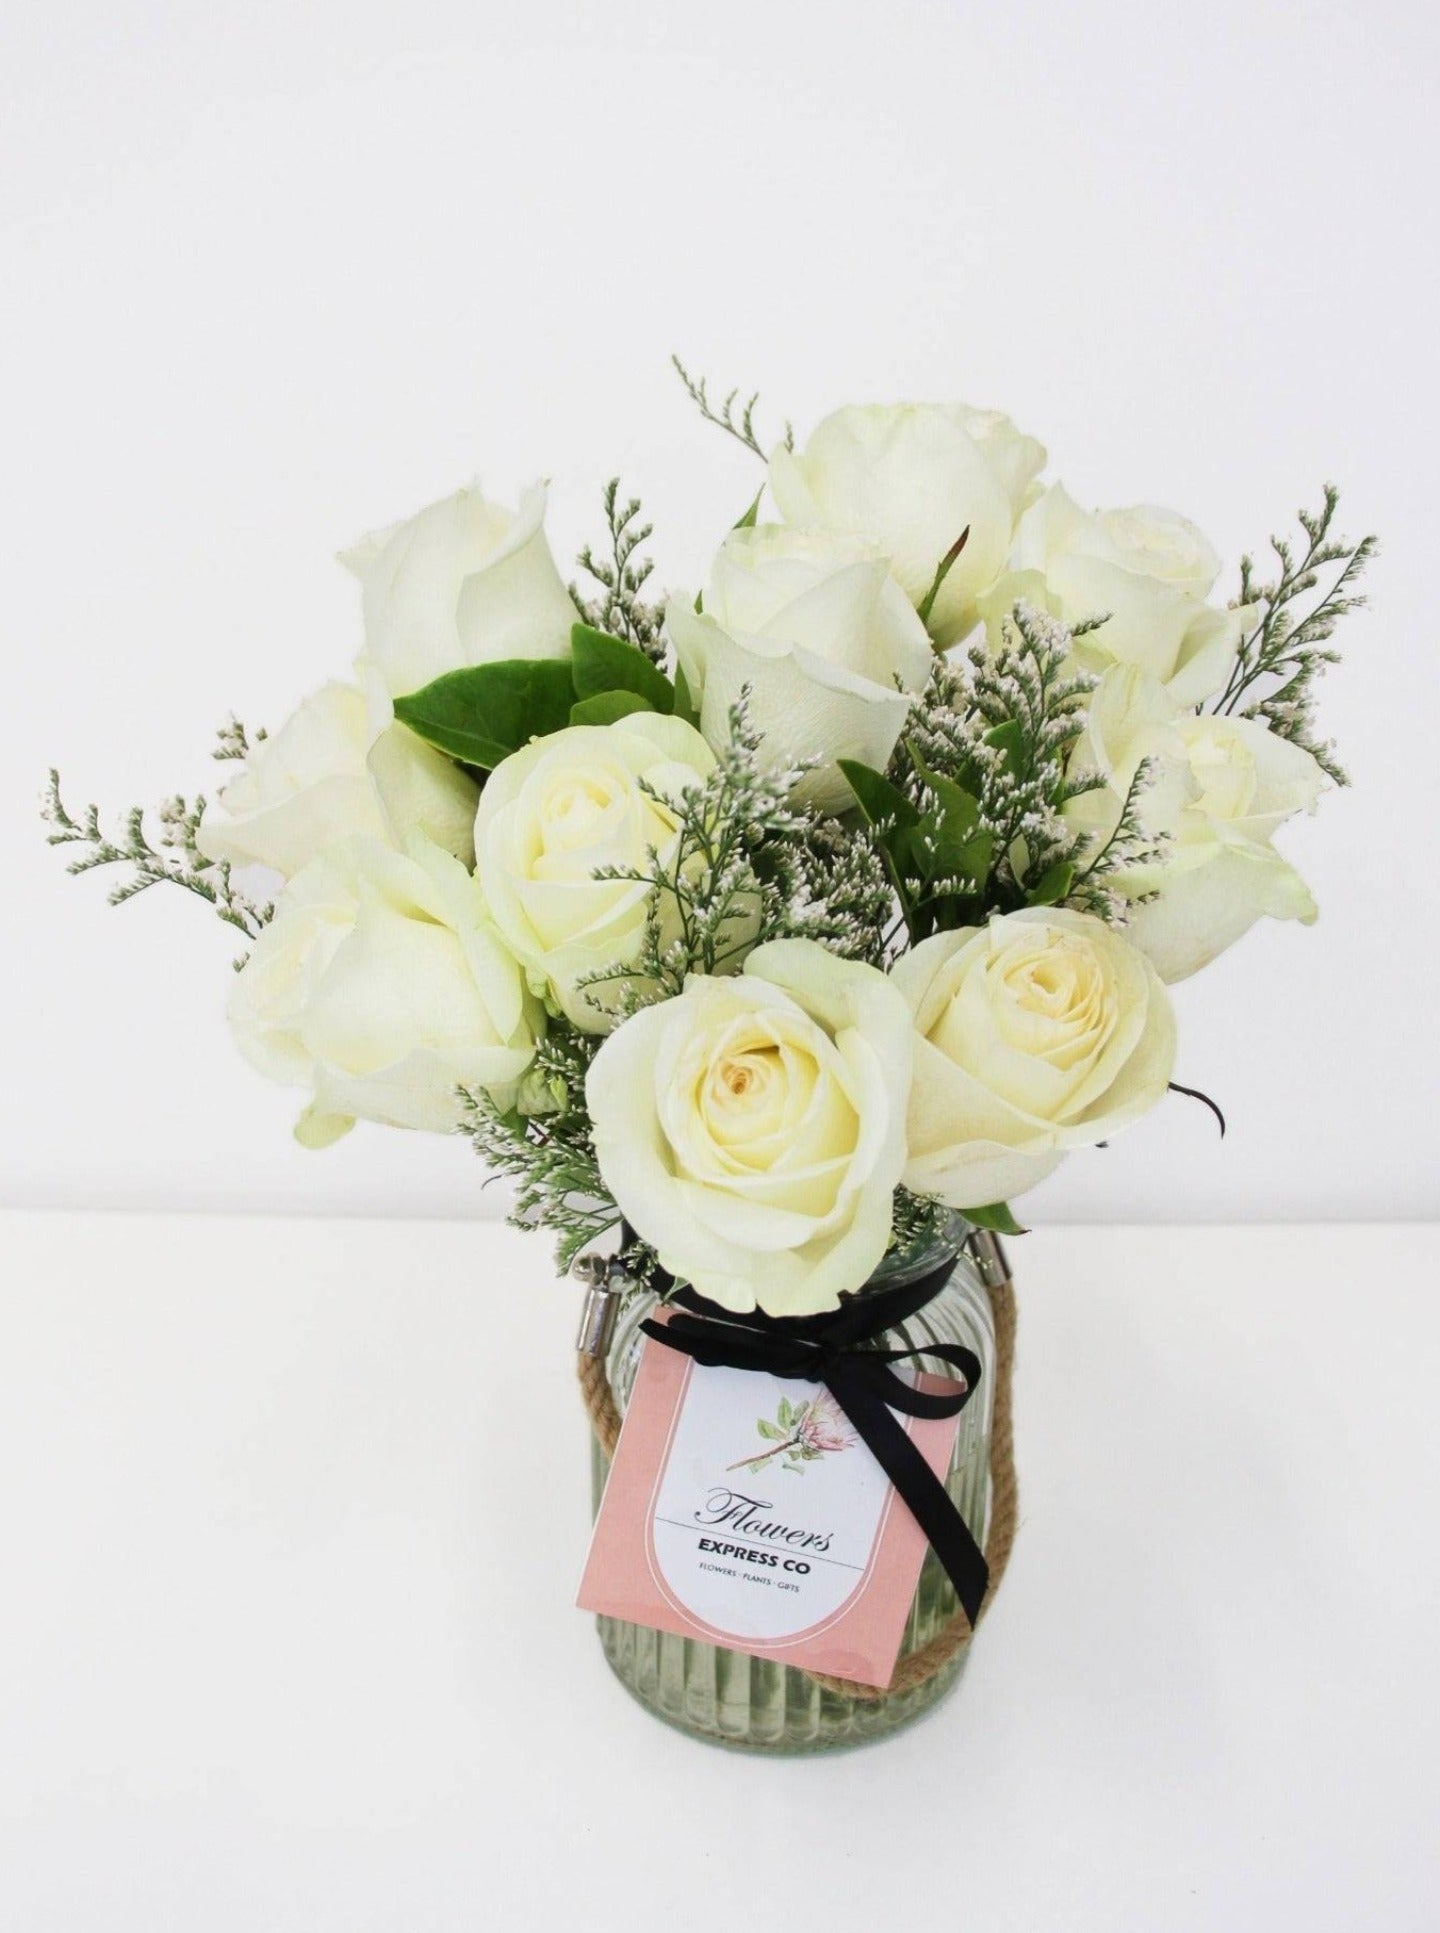 Ten stems of white roses are arranged in a glass jar made by a florist in Melbourne.